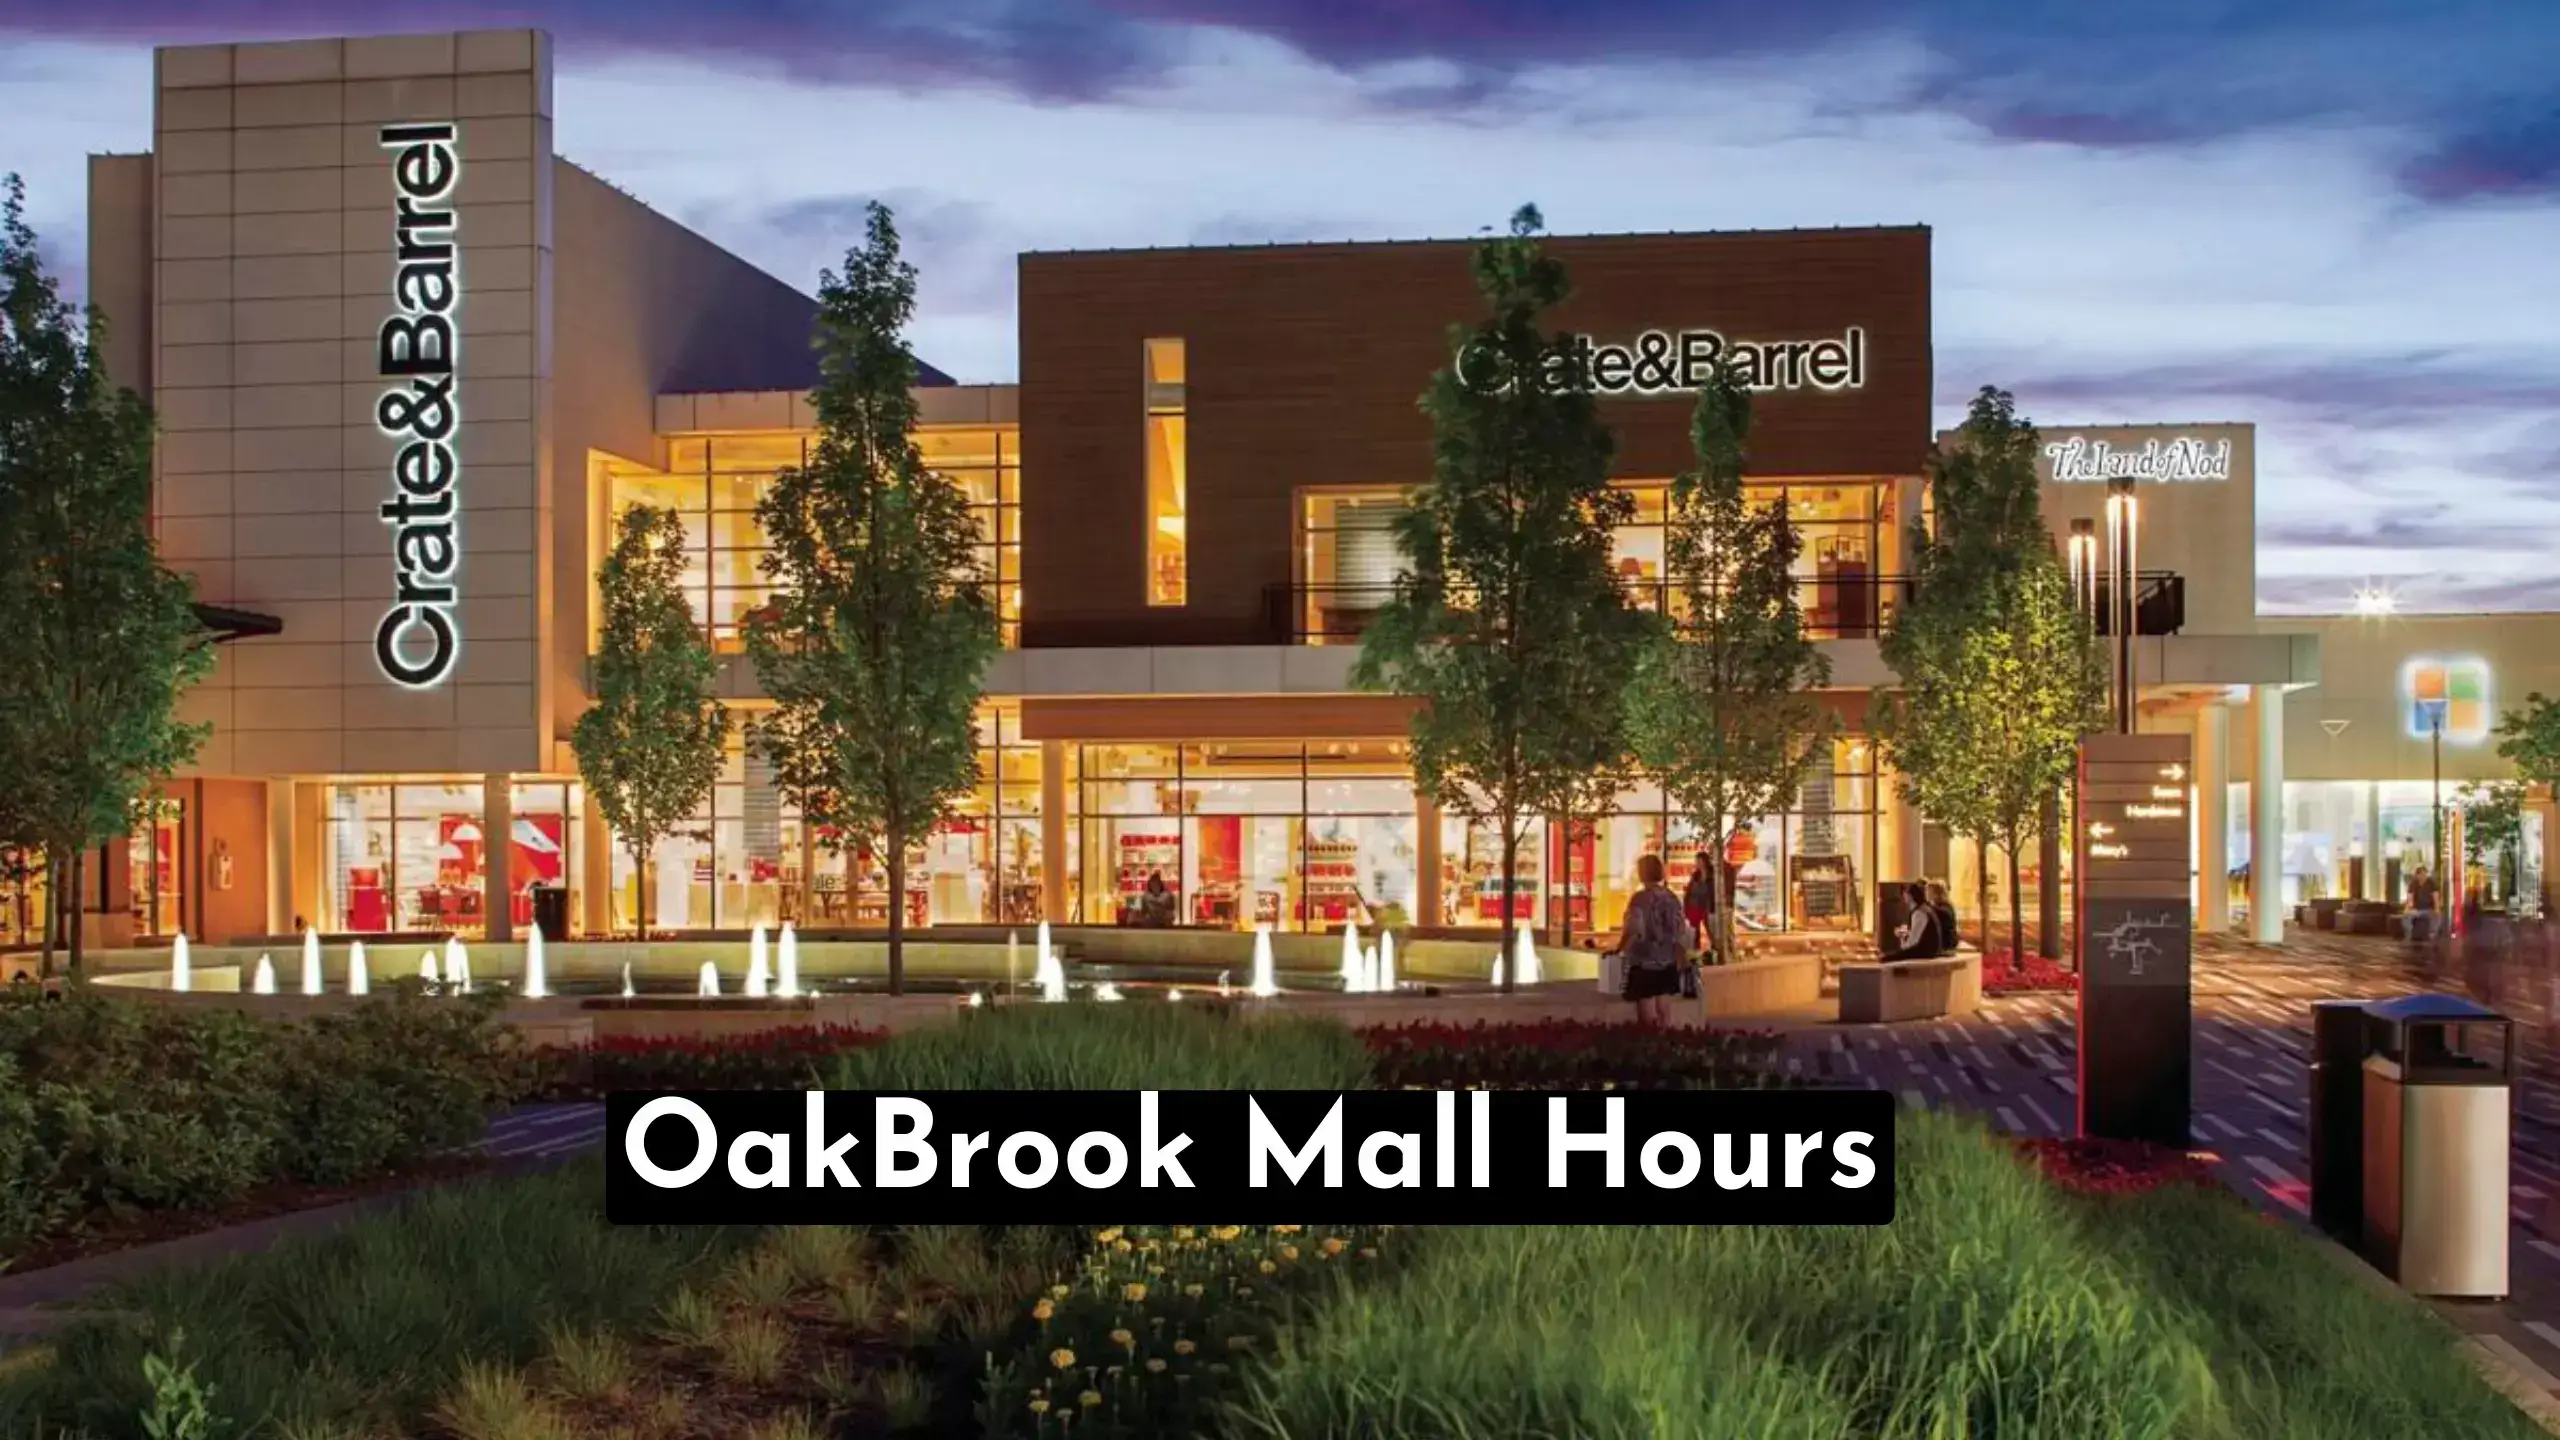 Discover convenient shopping hours at OakBrook Mall. Plan your visit with accurate OakBrook Mall hours for stress-free shopping.